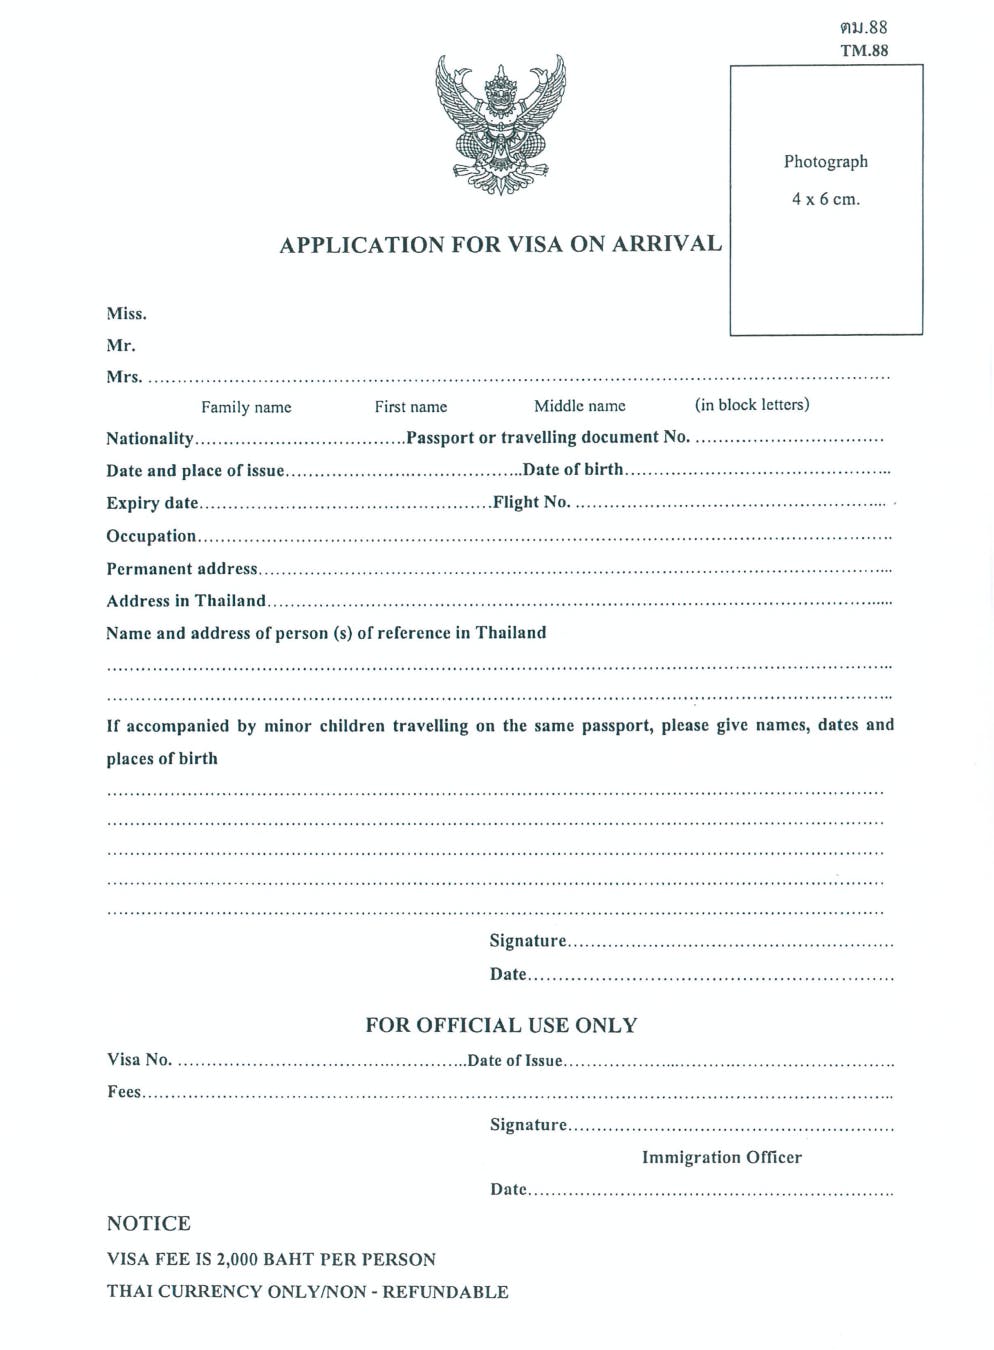 Example of what a Thailand visa on arrival application form looks like